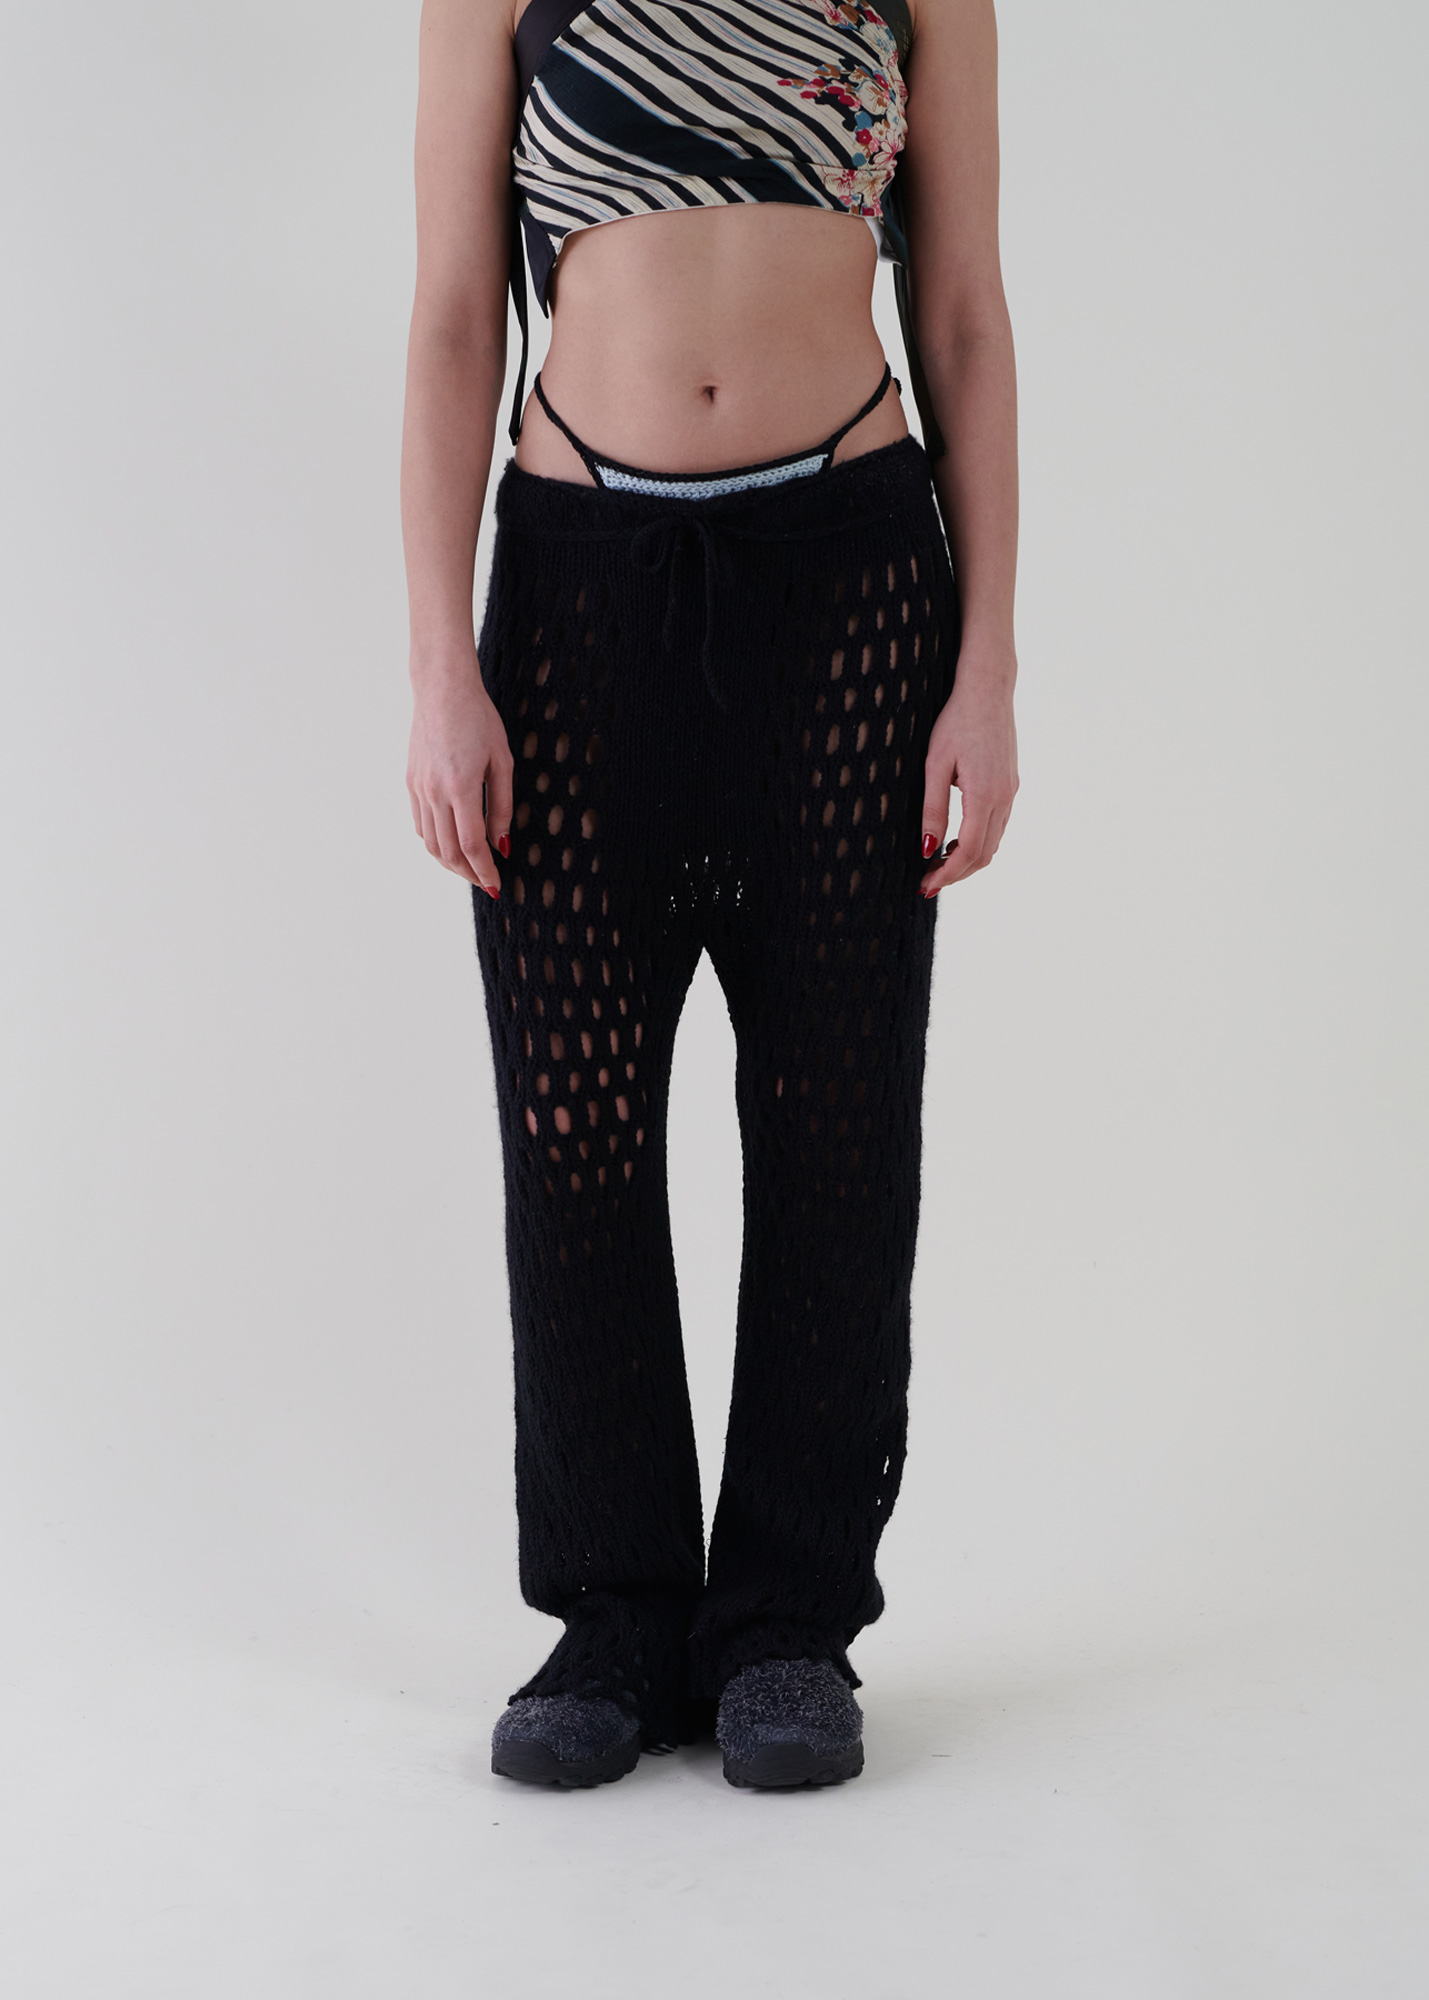 Sustainable fashion with upcycled alpaca crochet trousers from Aldwin Teva William